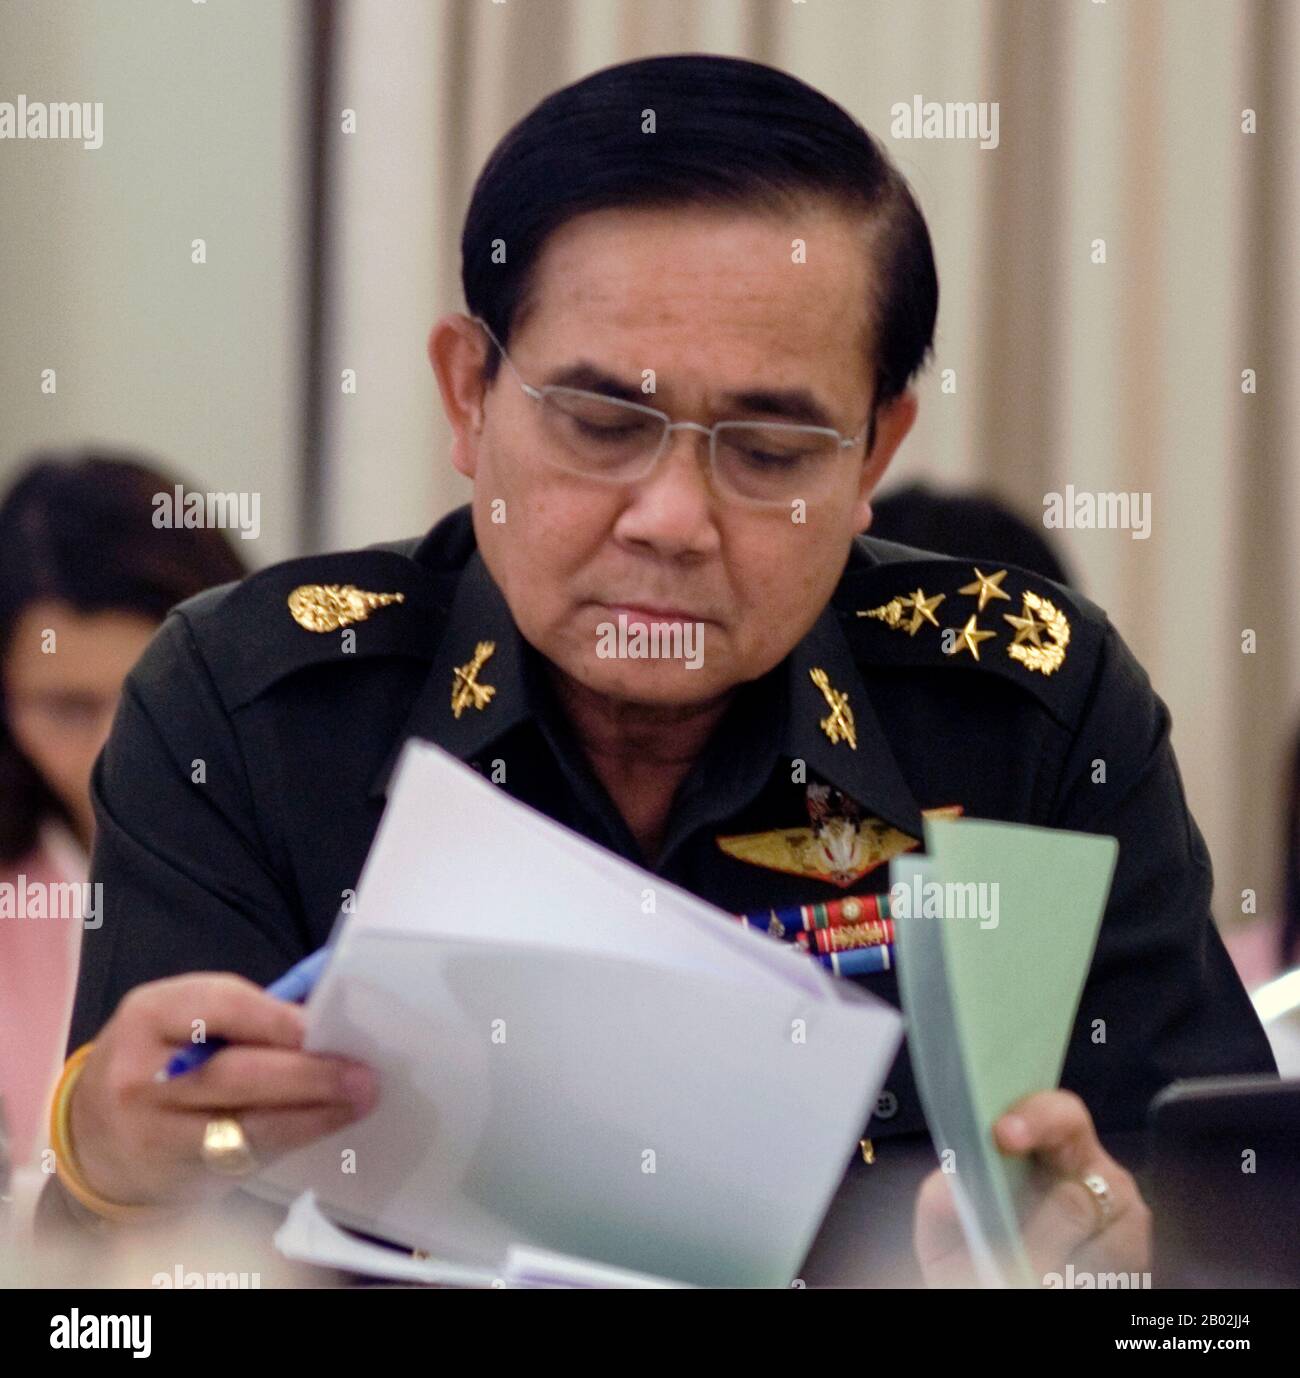 Prayuth Chan-ocha (Thai: ประยุทธ์ จันทร์โอชา; born 21 March 1954) is a Thai army officer who is concurrently the Commander in Chief of the Royal Thai Army and the Leader of the National Council for Peace and Order (NCPO).  Prayuth has been characterised as a strong royalist and an opponent of former prime minister Thaksin Shinawatra.  During the political crisis that began in November 2013 and involved the protests against the caretaker government of Yingluck Shinawatra, Prayuth attempted to maintain army neutrality. However, on 22 May 2014, Prayuth launched a military coup against the governm Stock Photo